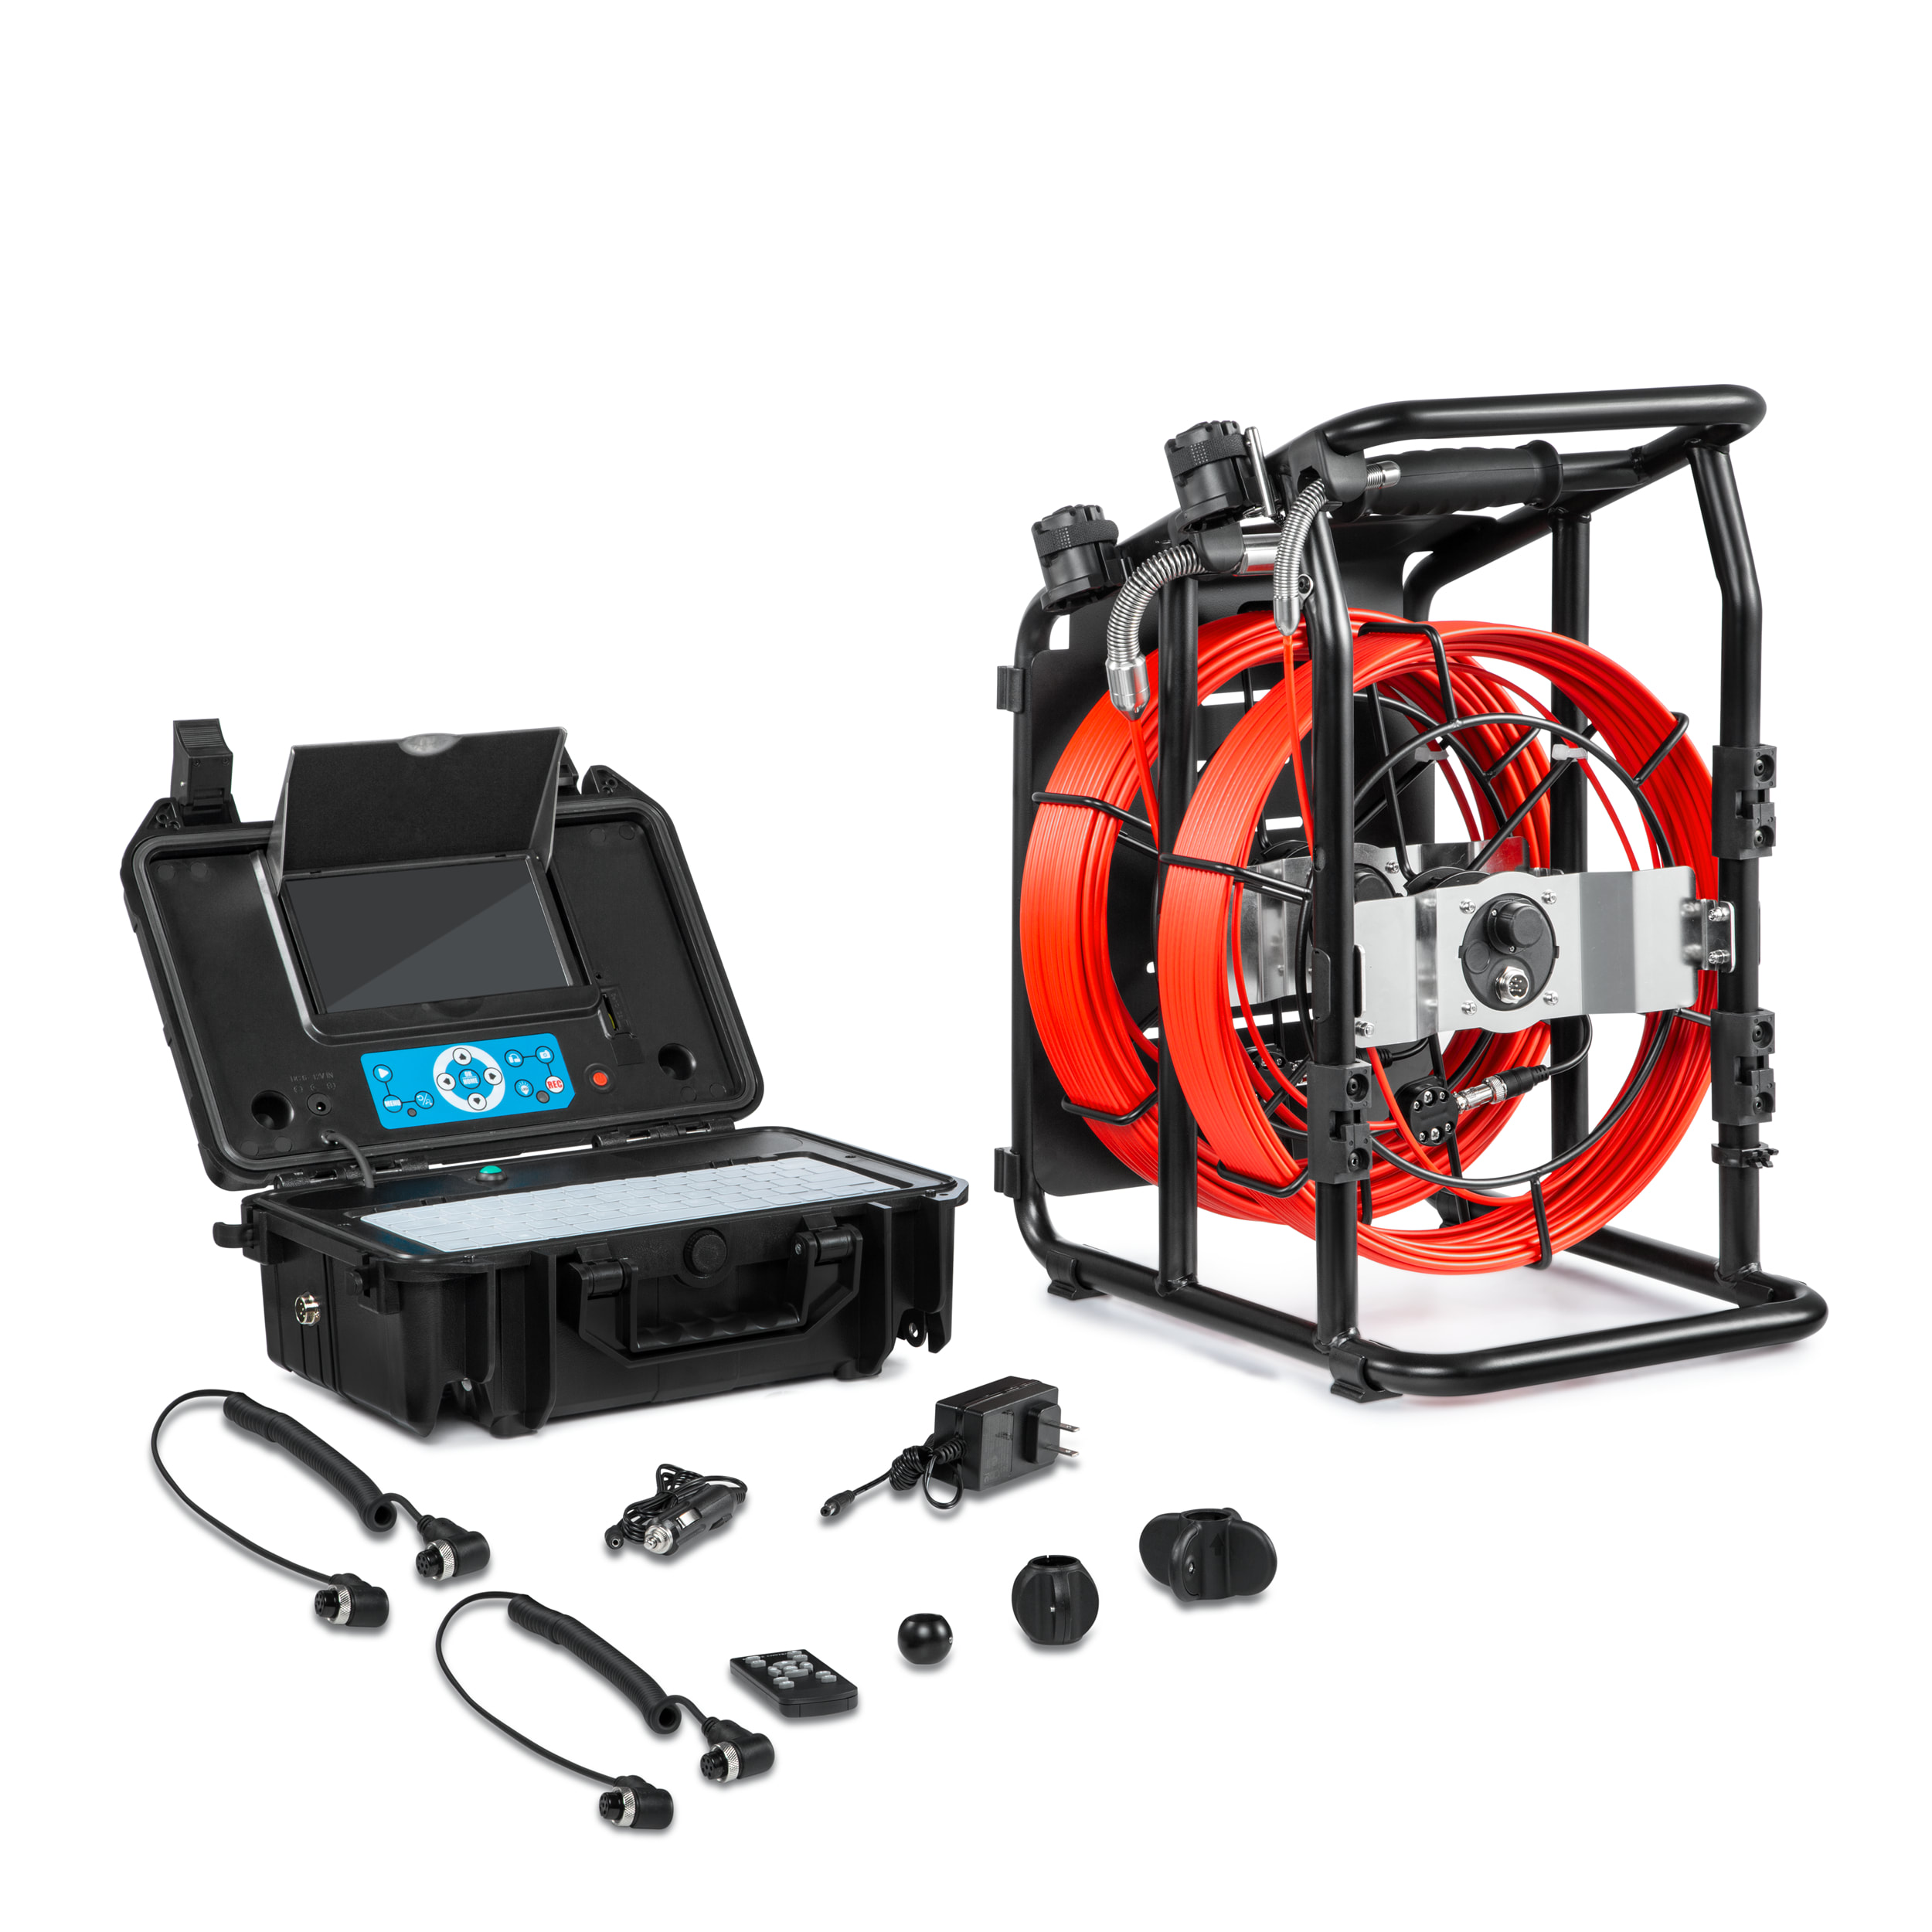 all-in-one professional pipe inspection camera system Vividia VS-749D